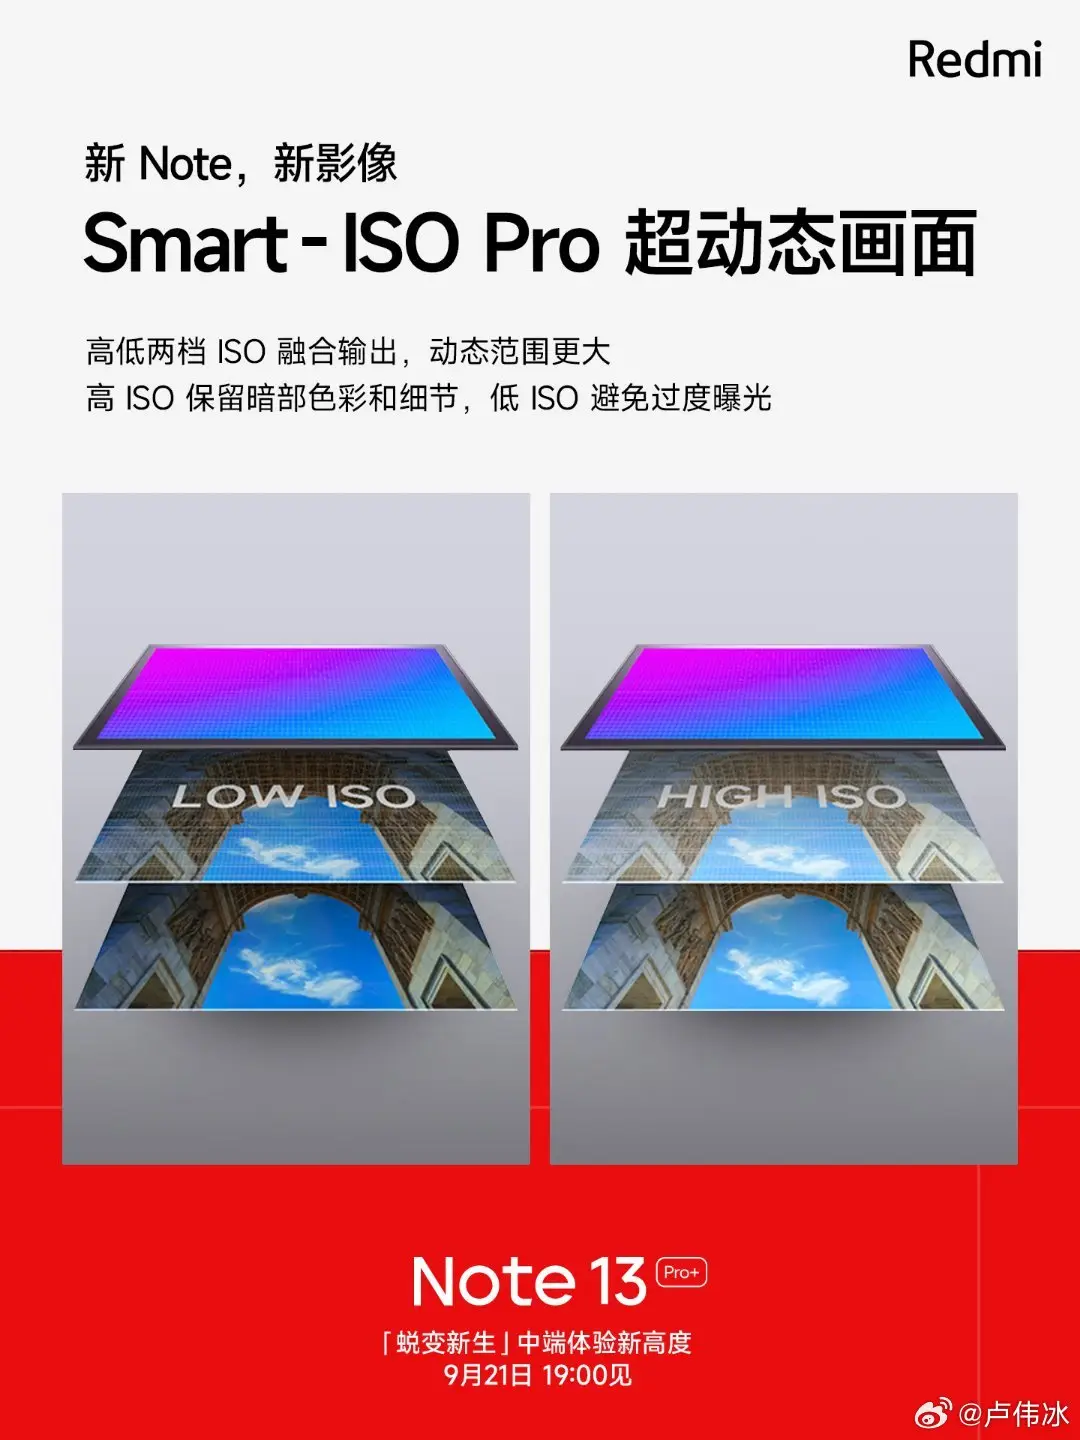 Redmi Note 13 Pro+ Samsung ISOCELL HP3 200 MP